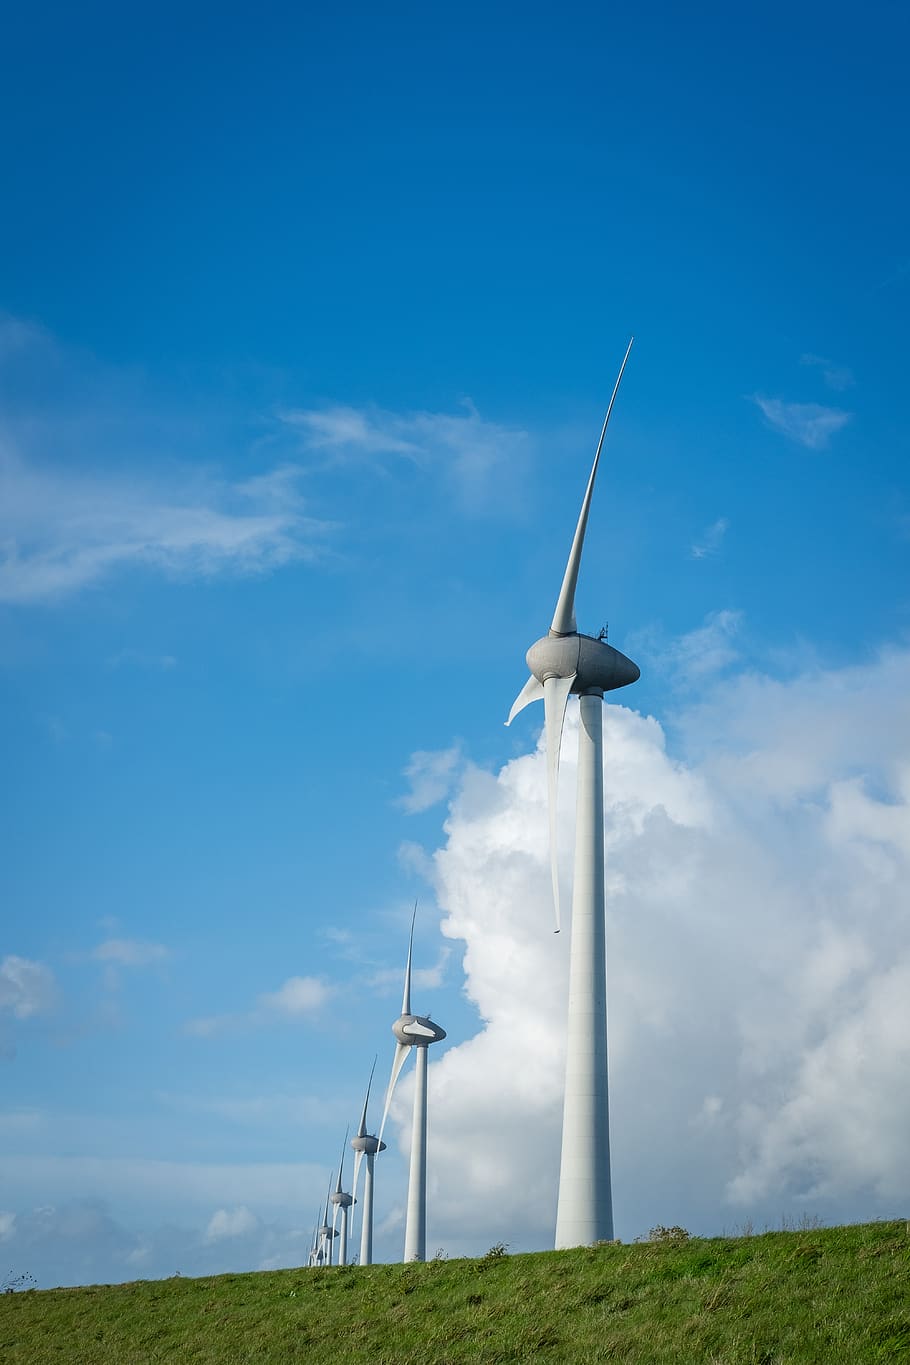 wind, windmill, energy, mill, sky, windmills, electricity, power, nature, environmental